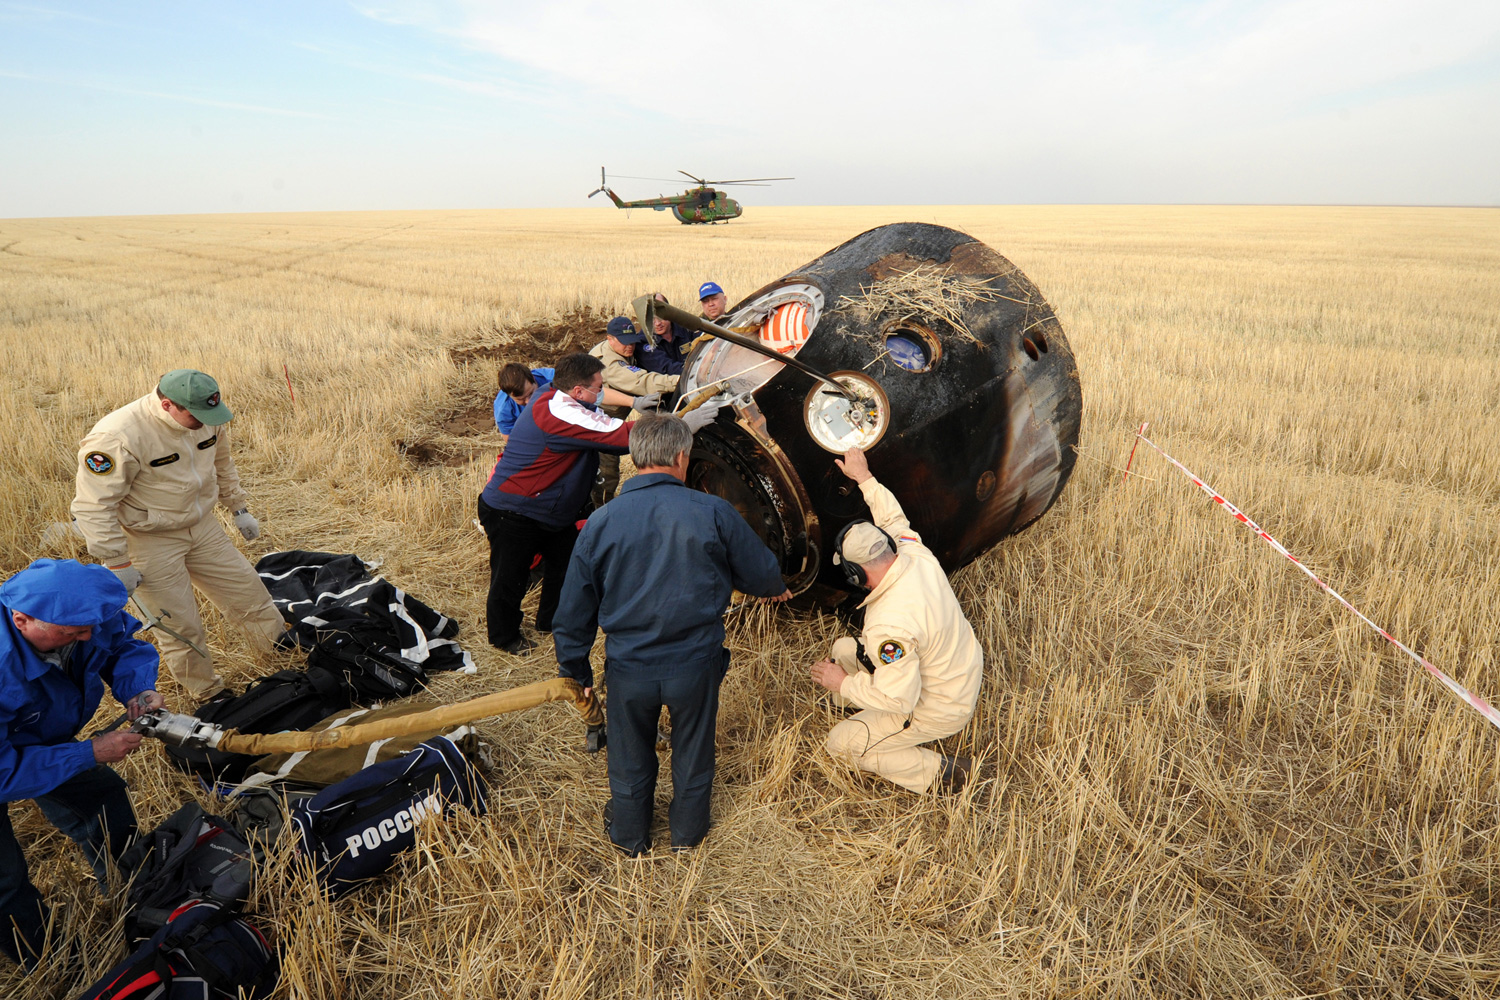 April 27, 2012. Russia's space agency ground personnel check the capsule Soyuz TMA-22 shortly after it landed near the town of Arkalyk, Kazakhstan.